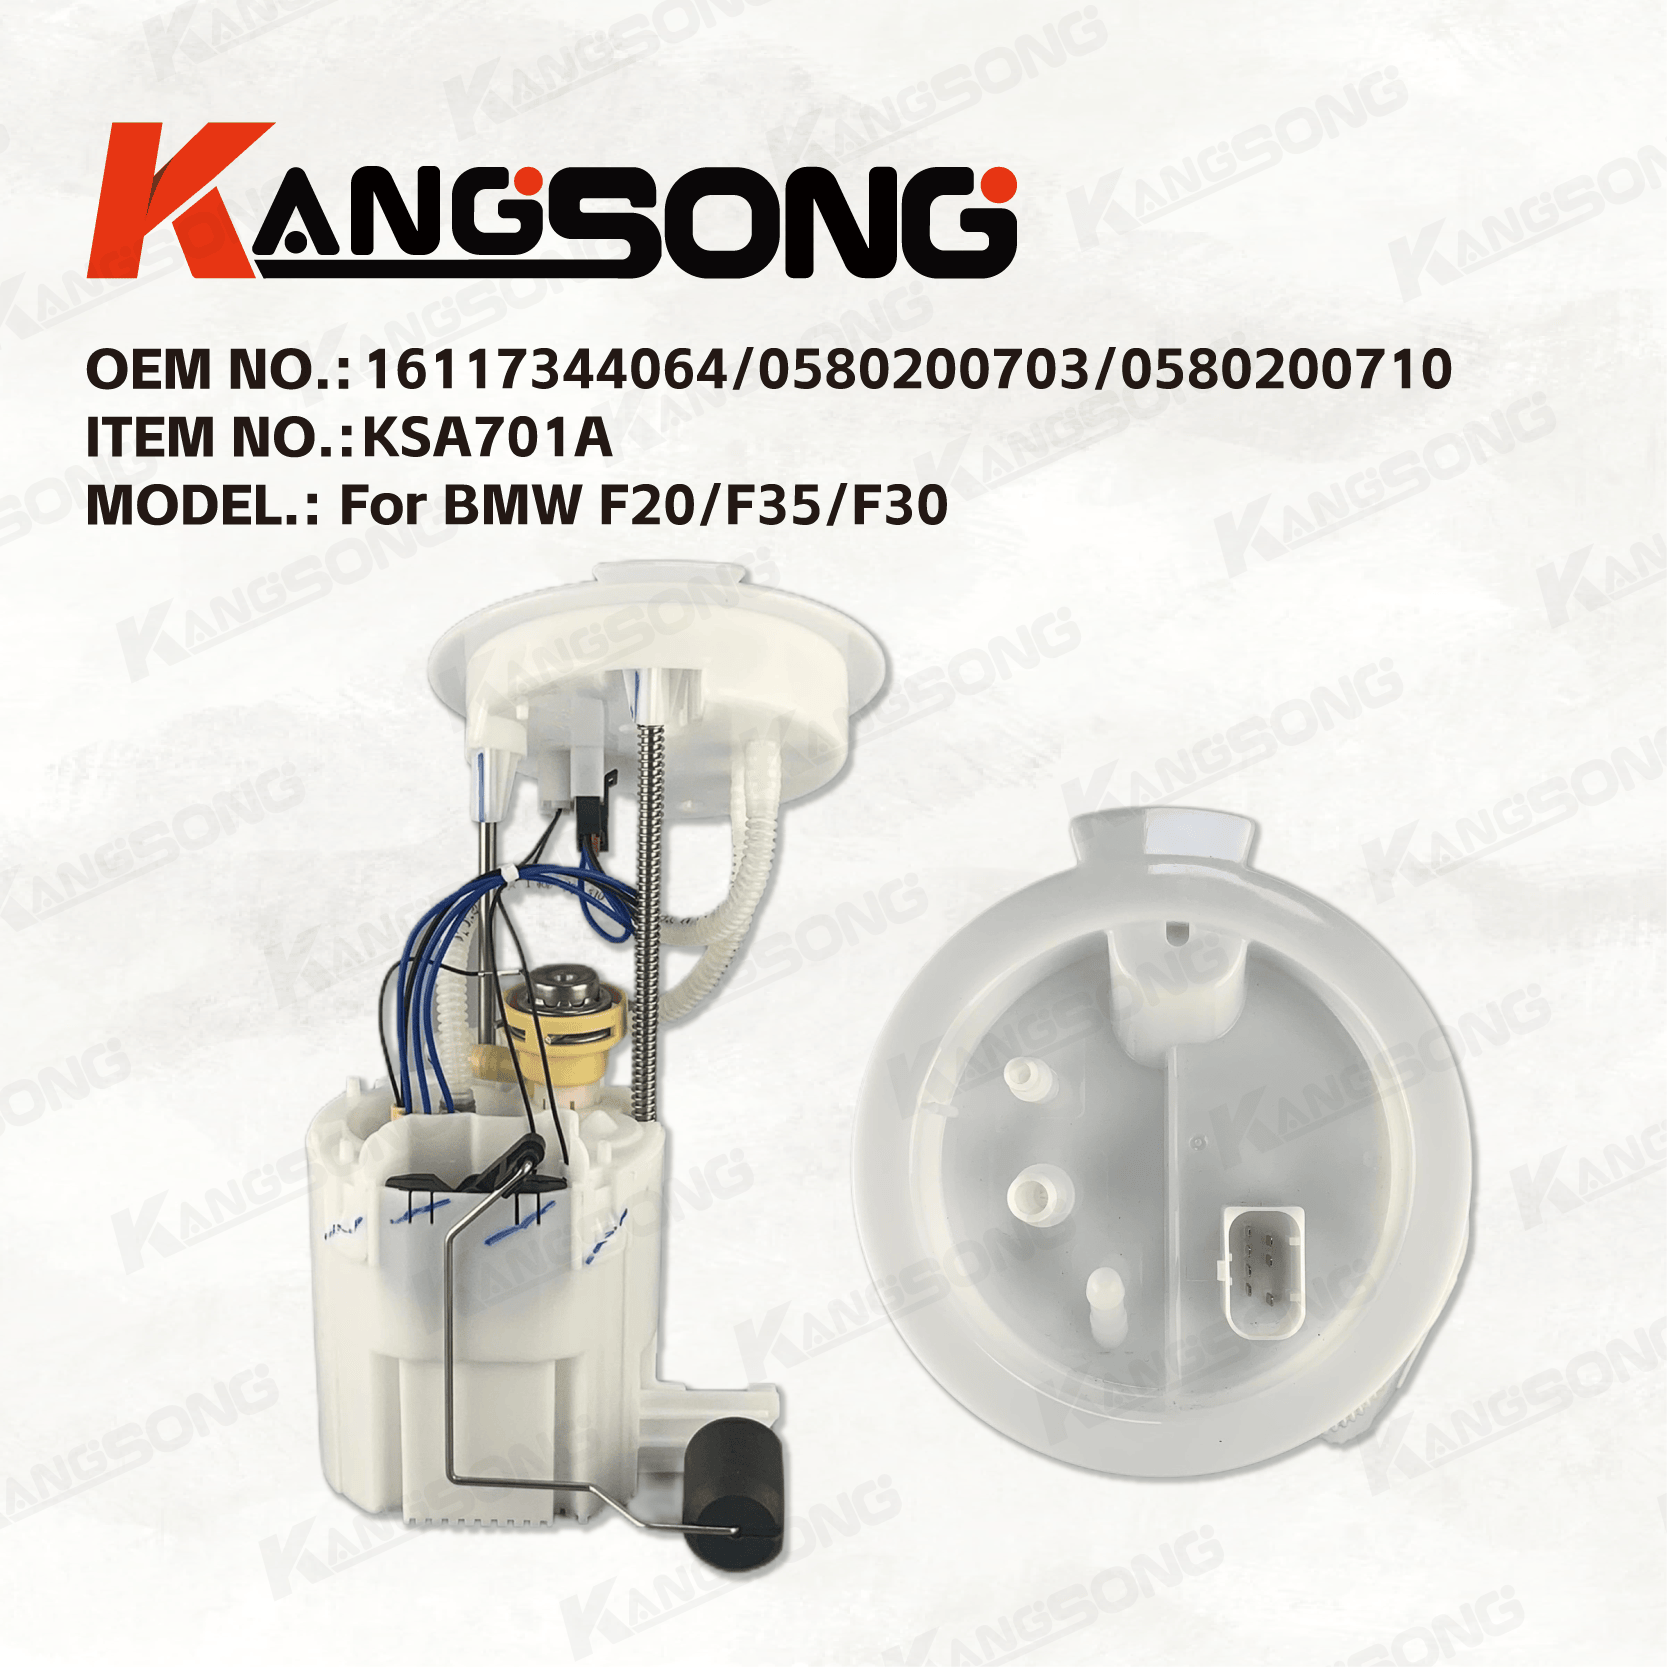 Applicable to BMW F20 F35 F30/16117344064 0580200703 0580200710/Fuel pump assmbly/KS-A701A